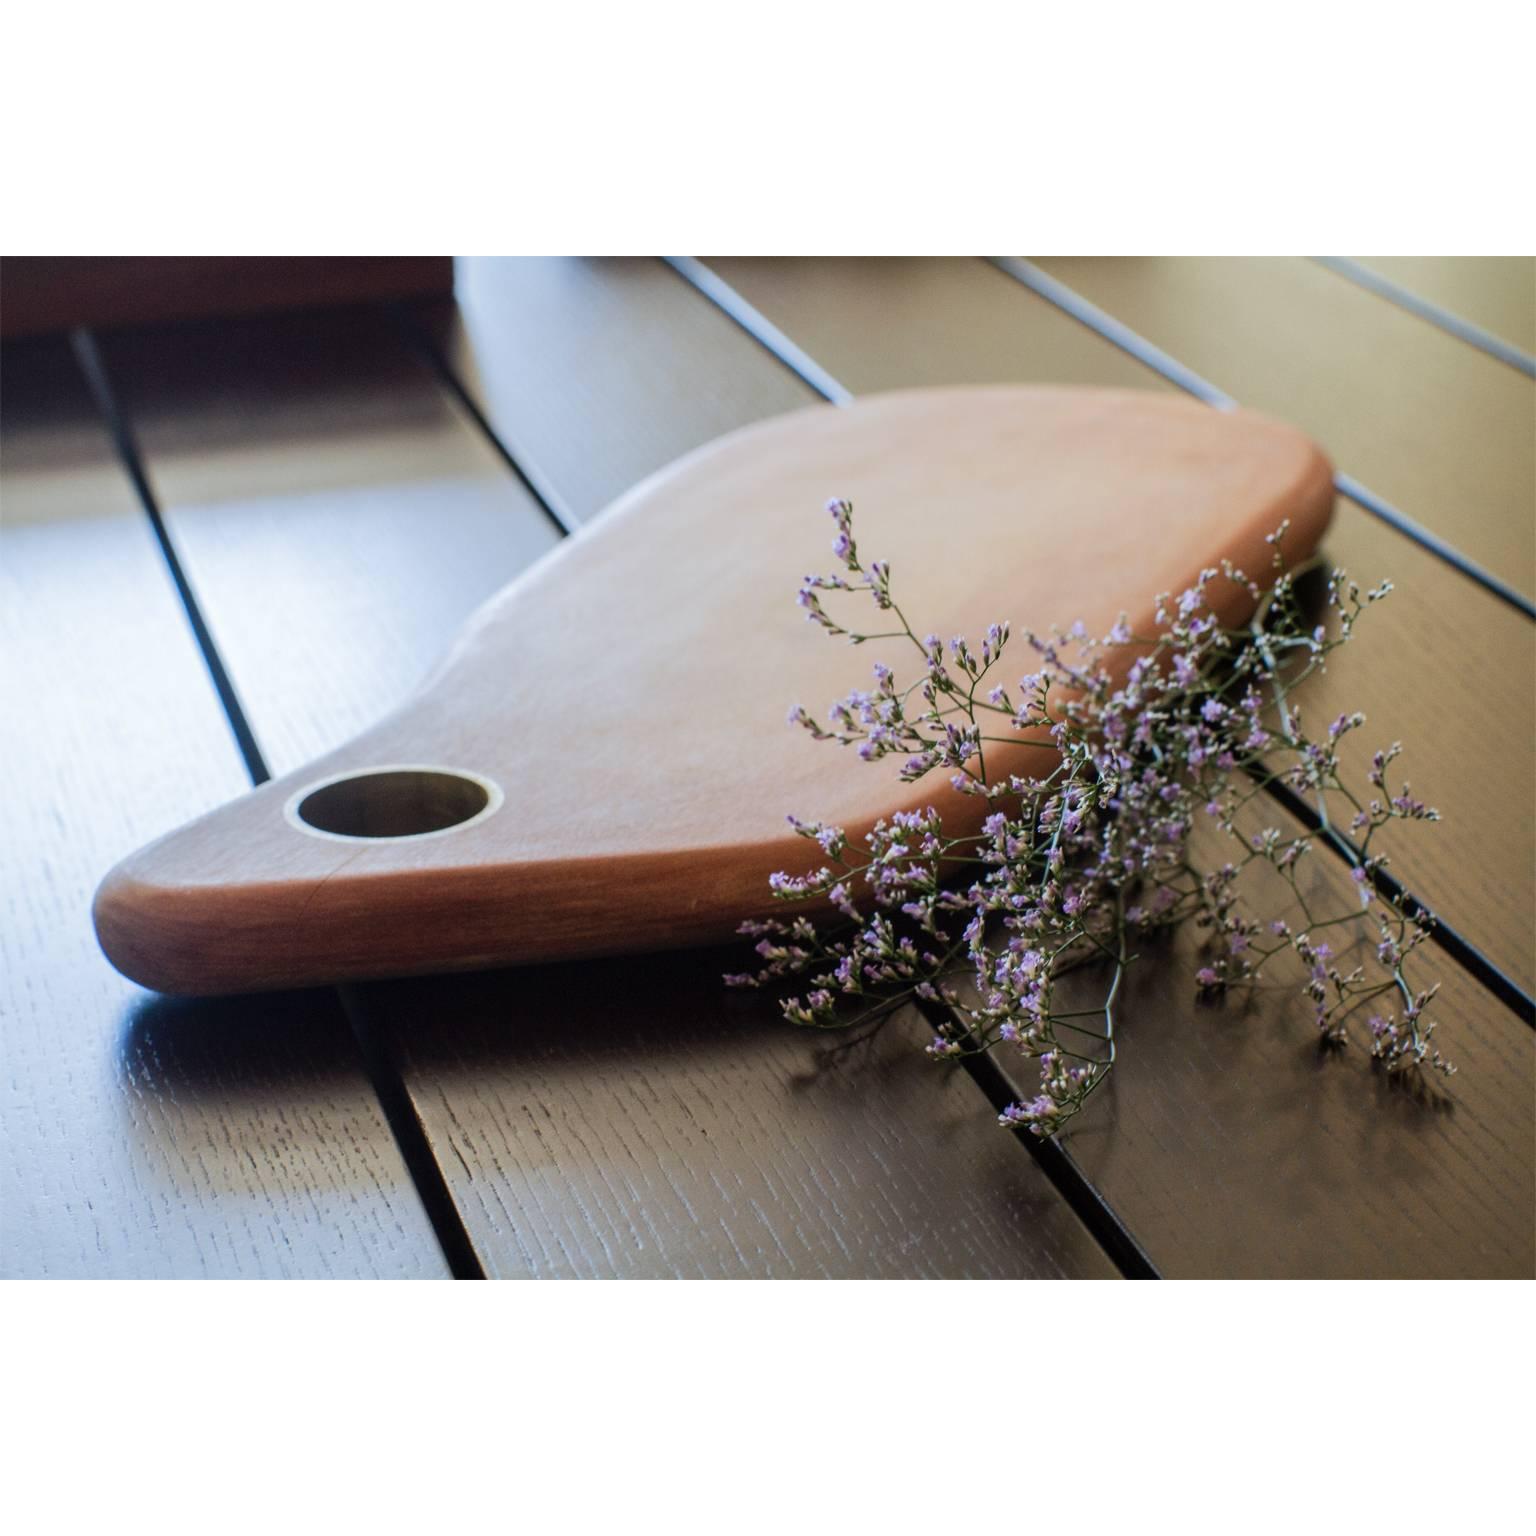 Modern Cutting Gourmet Board Made of Tropical Hardwood in Brazilian Contemporary Design For Sale